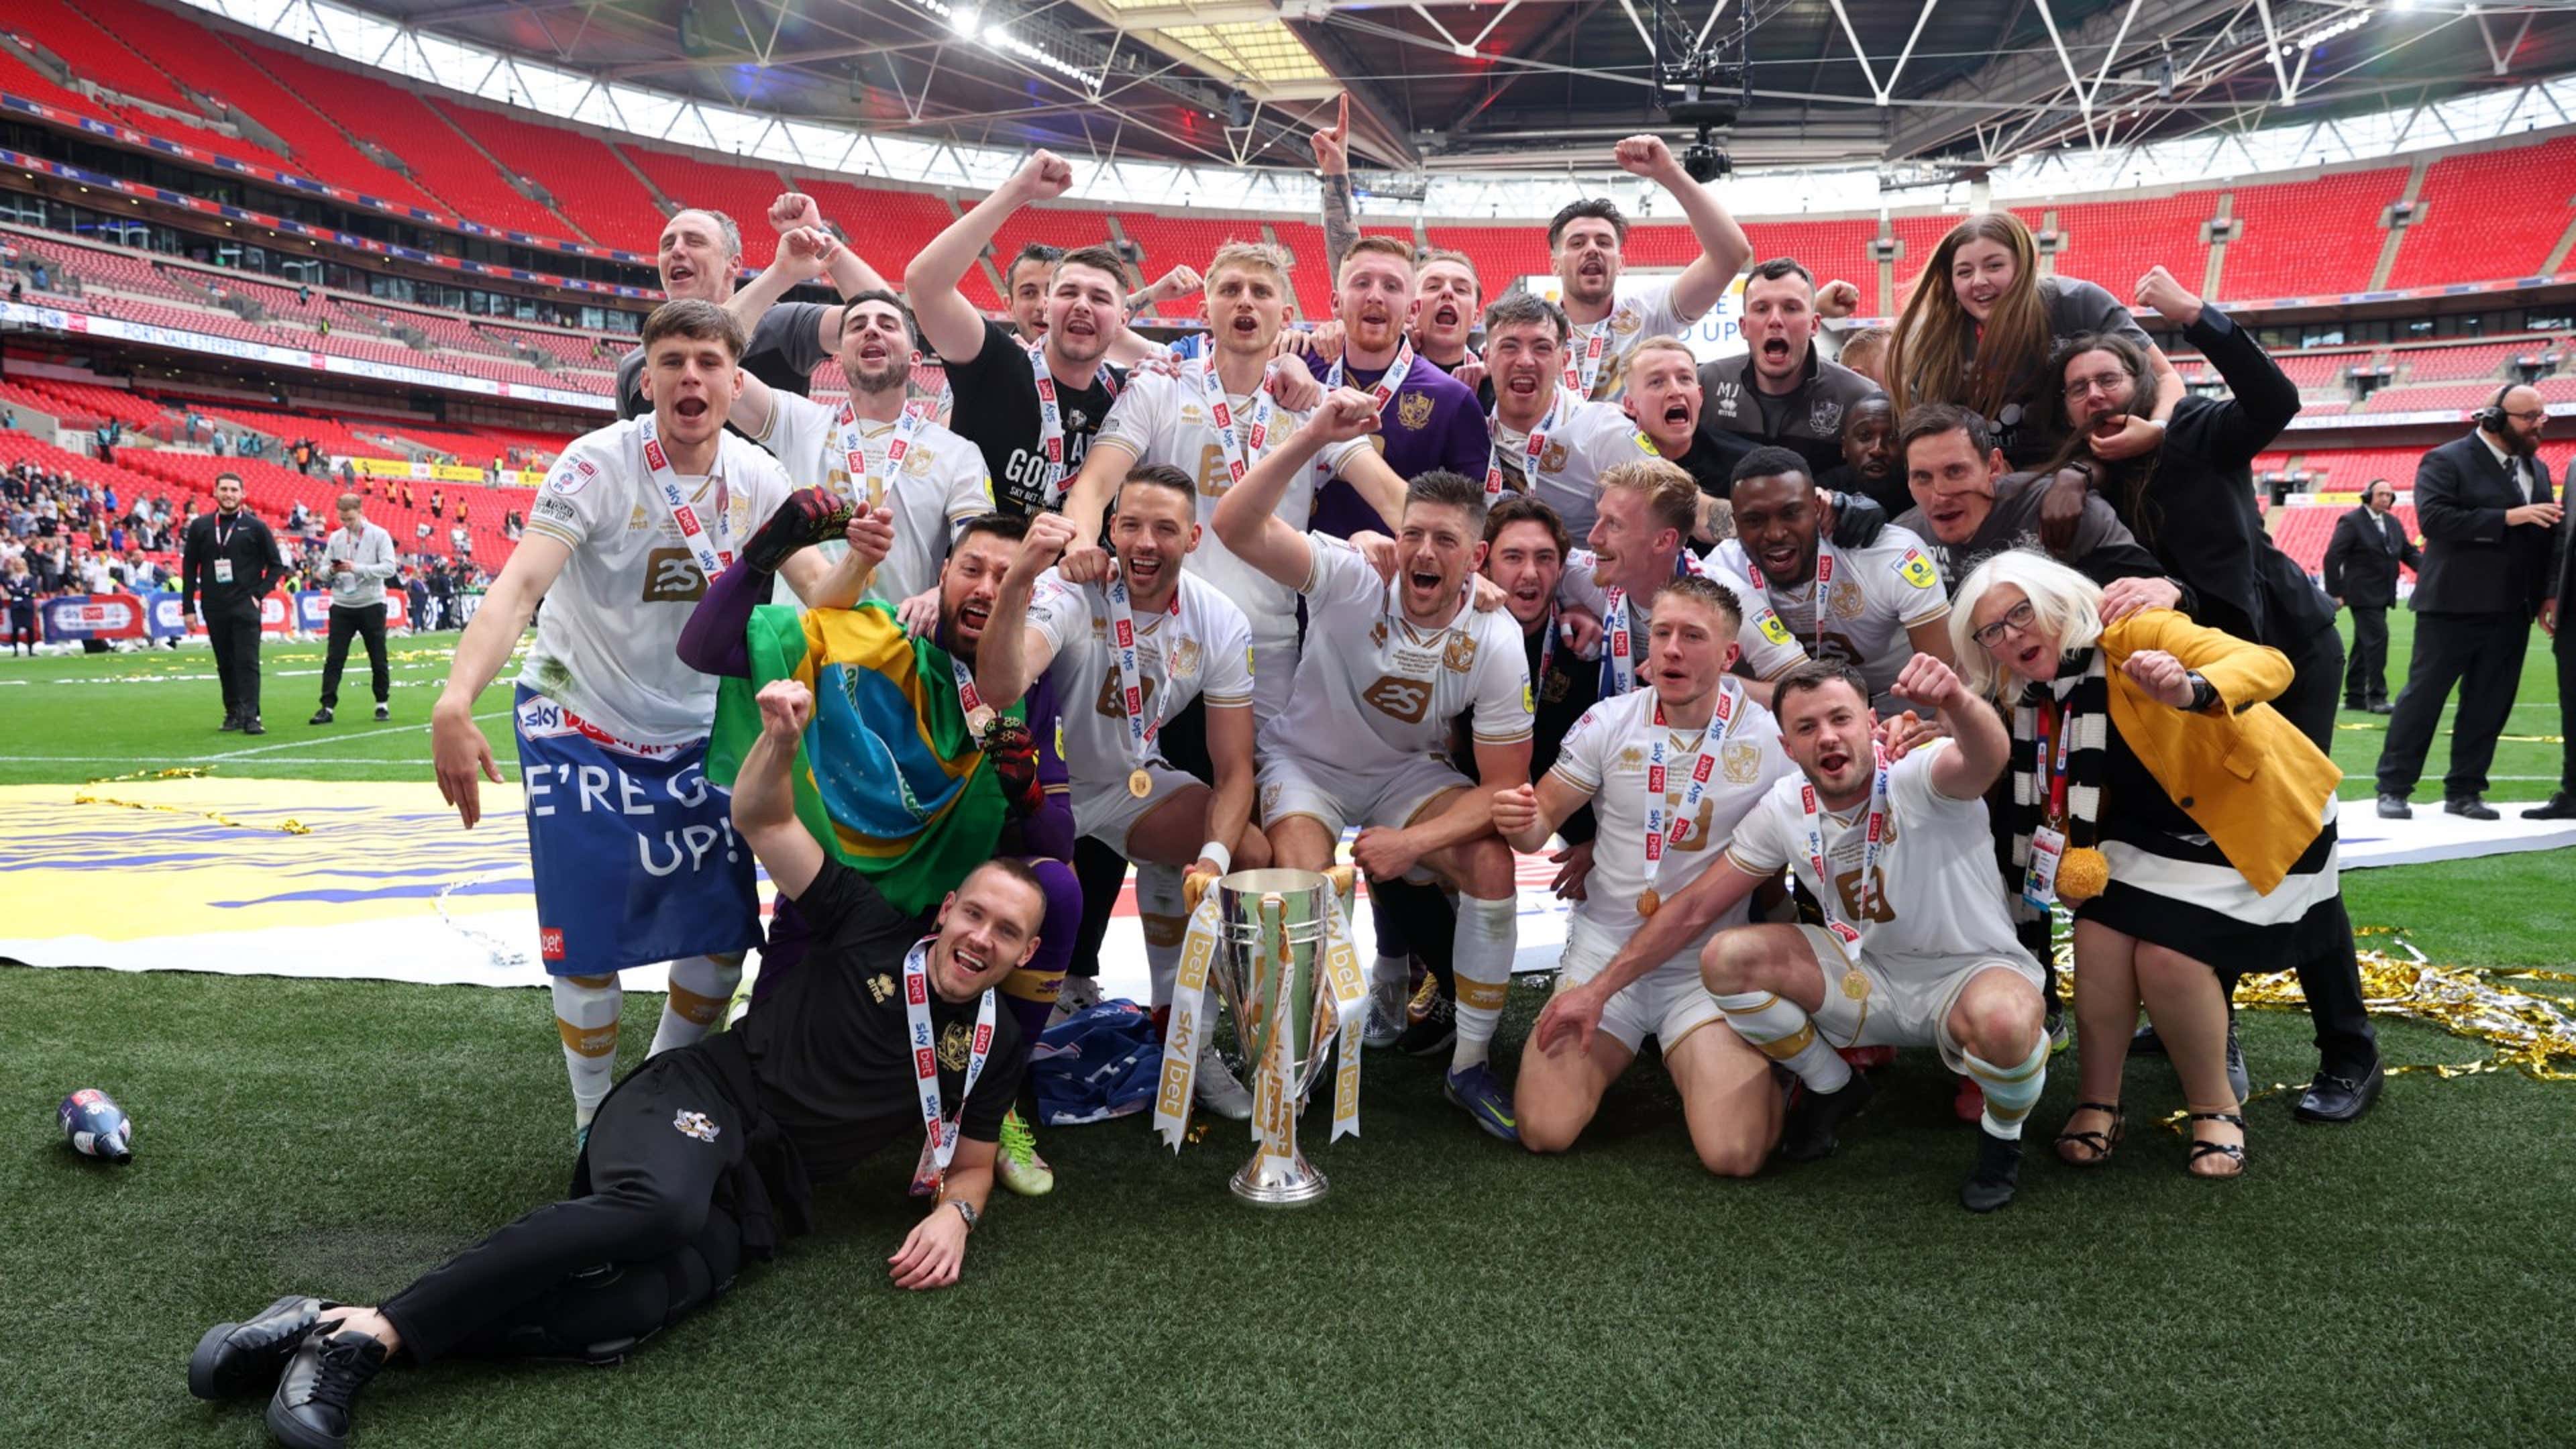 Championship play-off final 2022, Dates, kick-off times, TV schedule